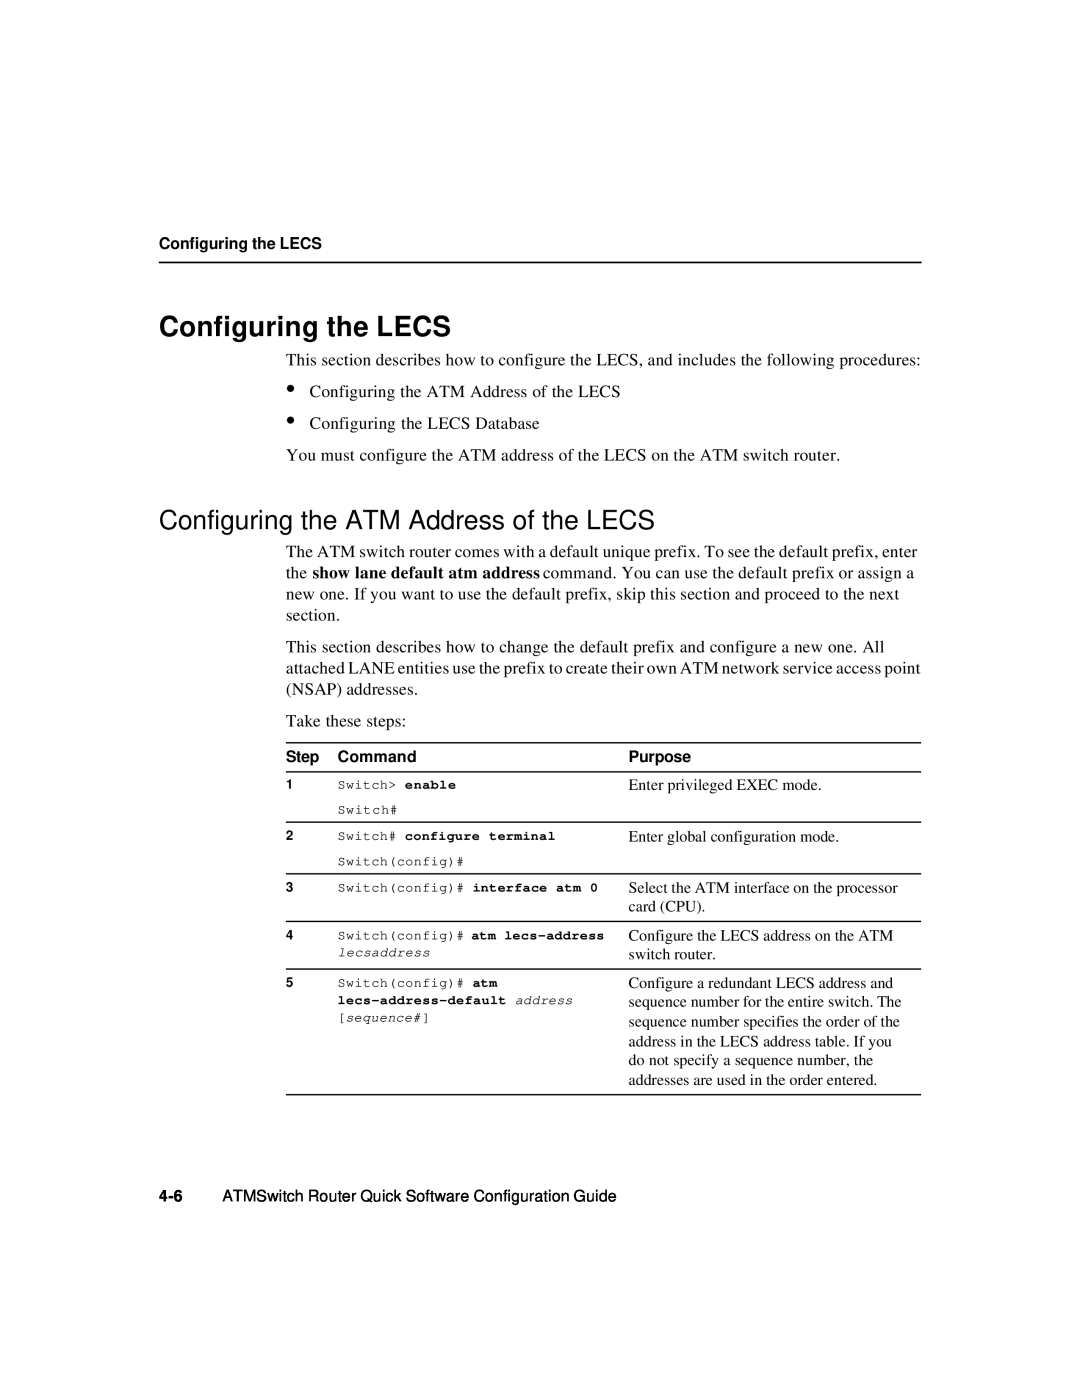 Cisco Systems 78-6897-01 manual Configuring the LECS, Configuring the ATM Address of the LECS 